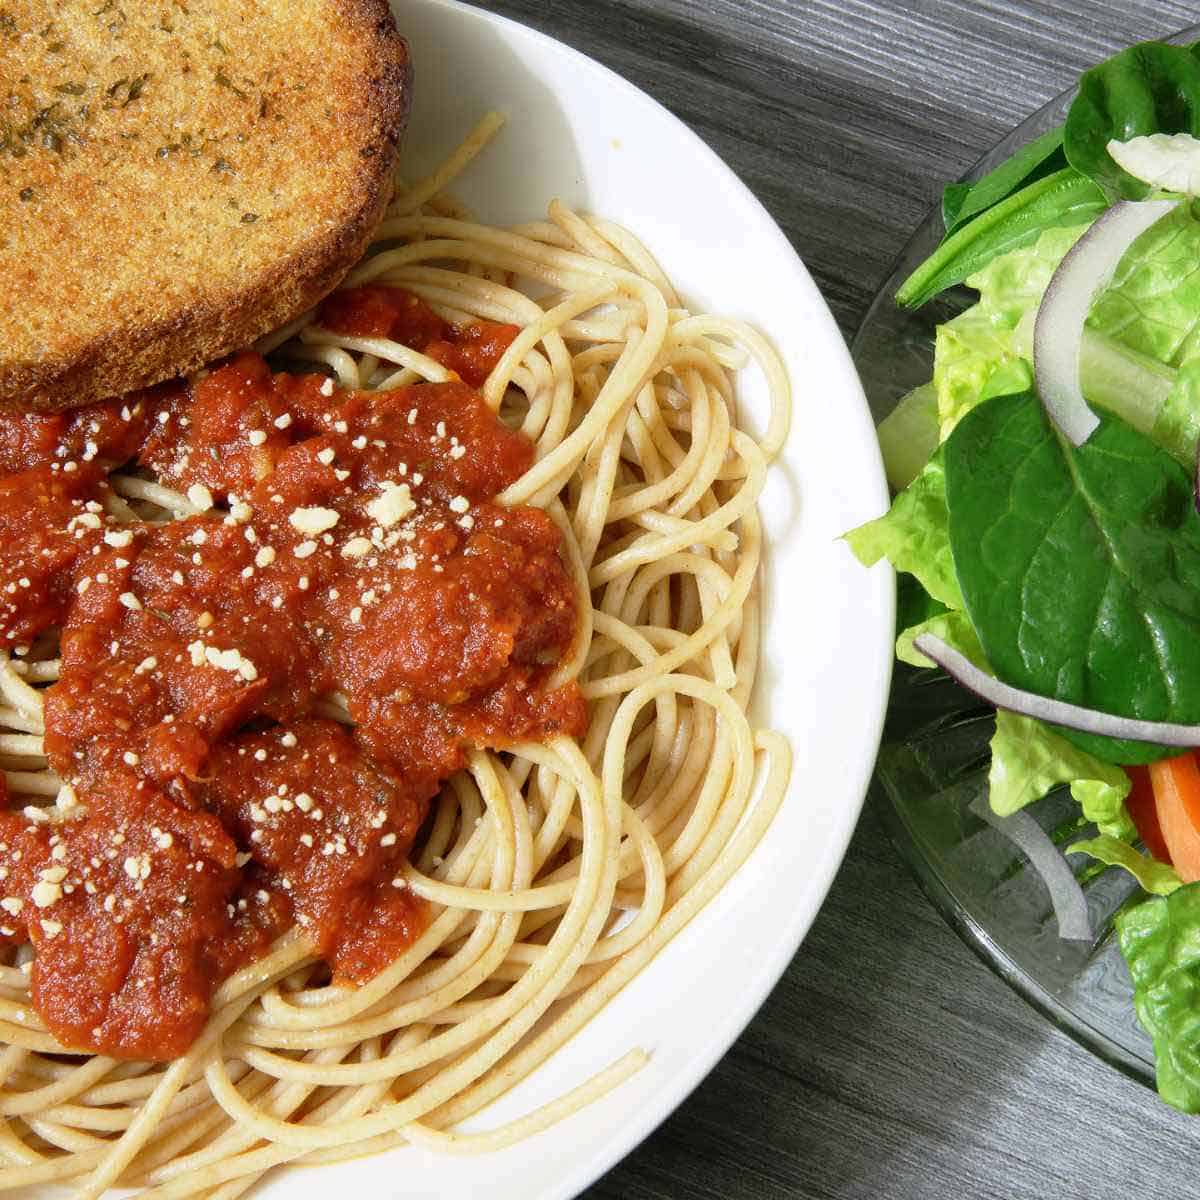 A plate of spaghetti and meatballs, and a salad.